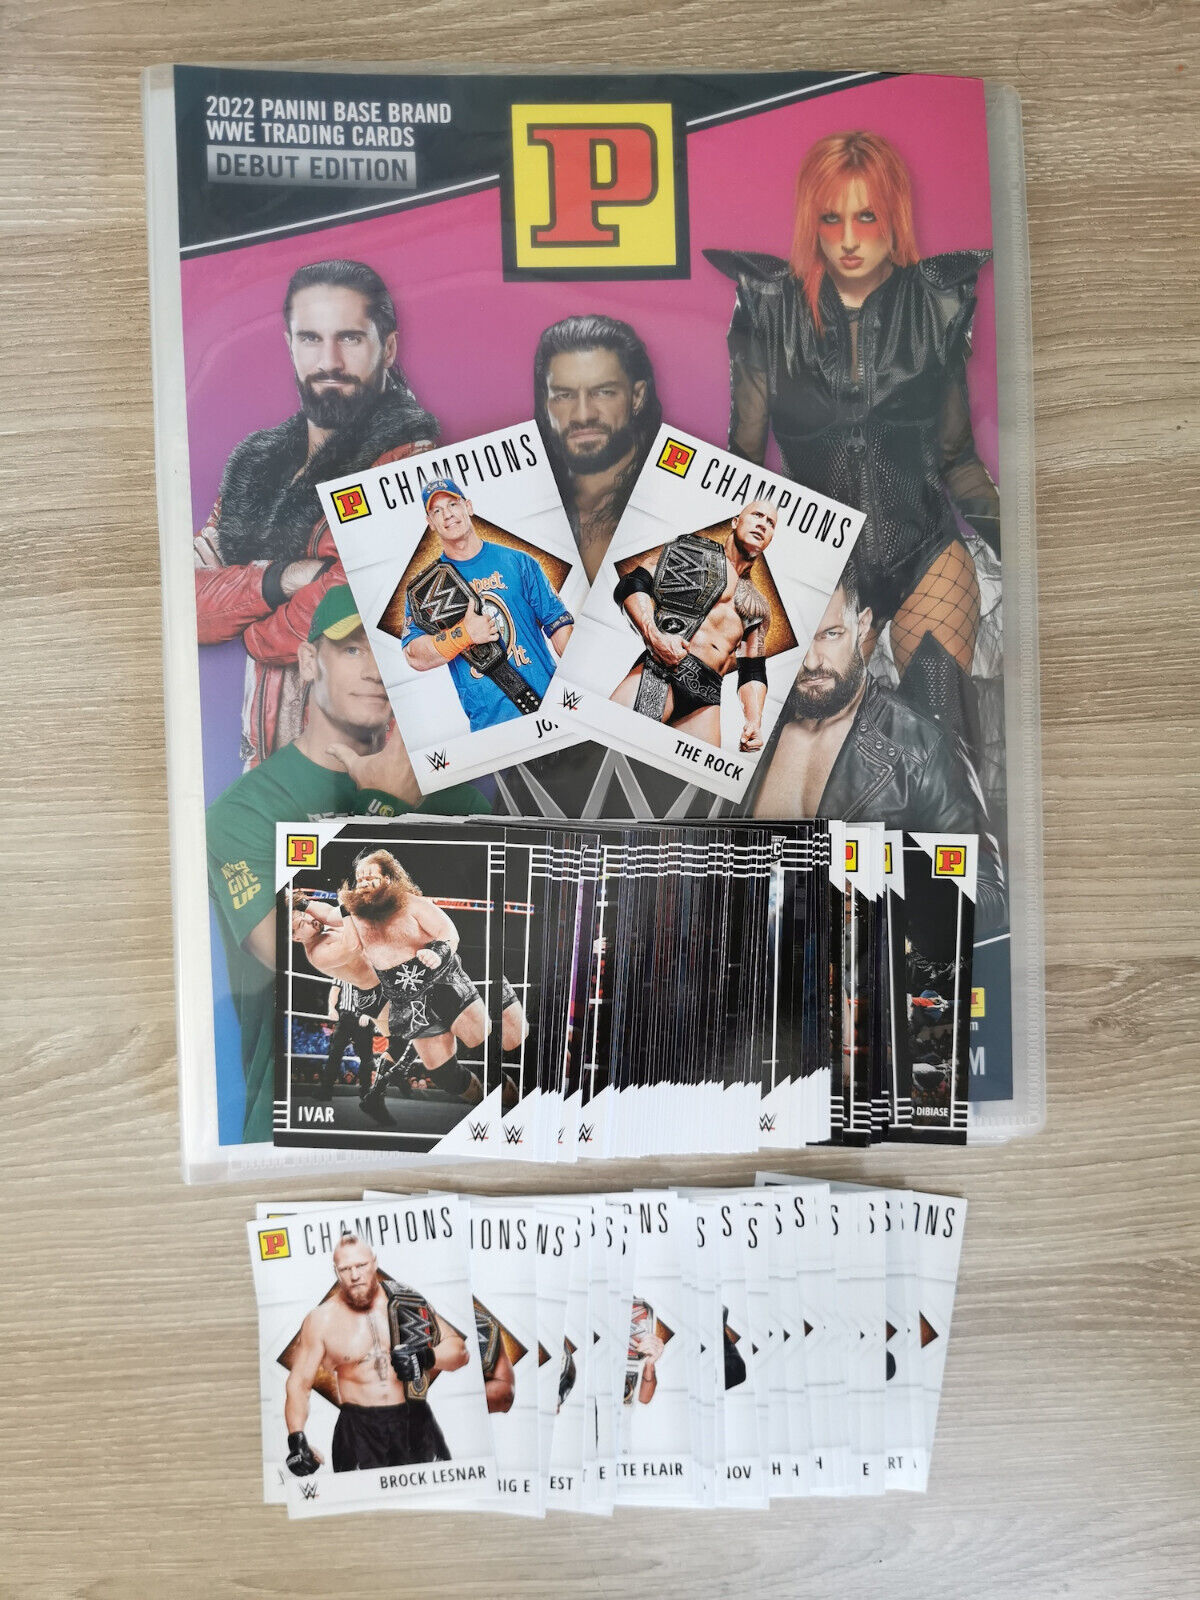 Panini WWE Debut Edition 2022 Basic Wrestling Cards, Legends & Champions